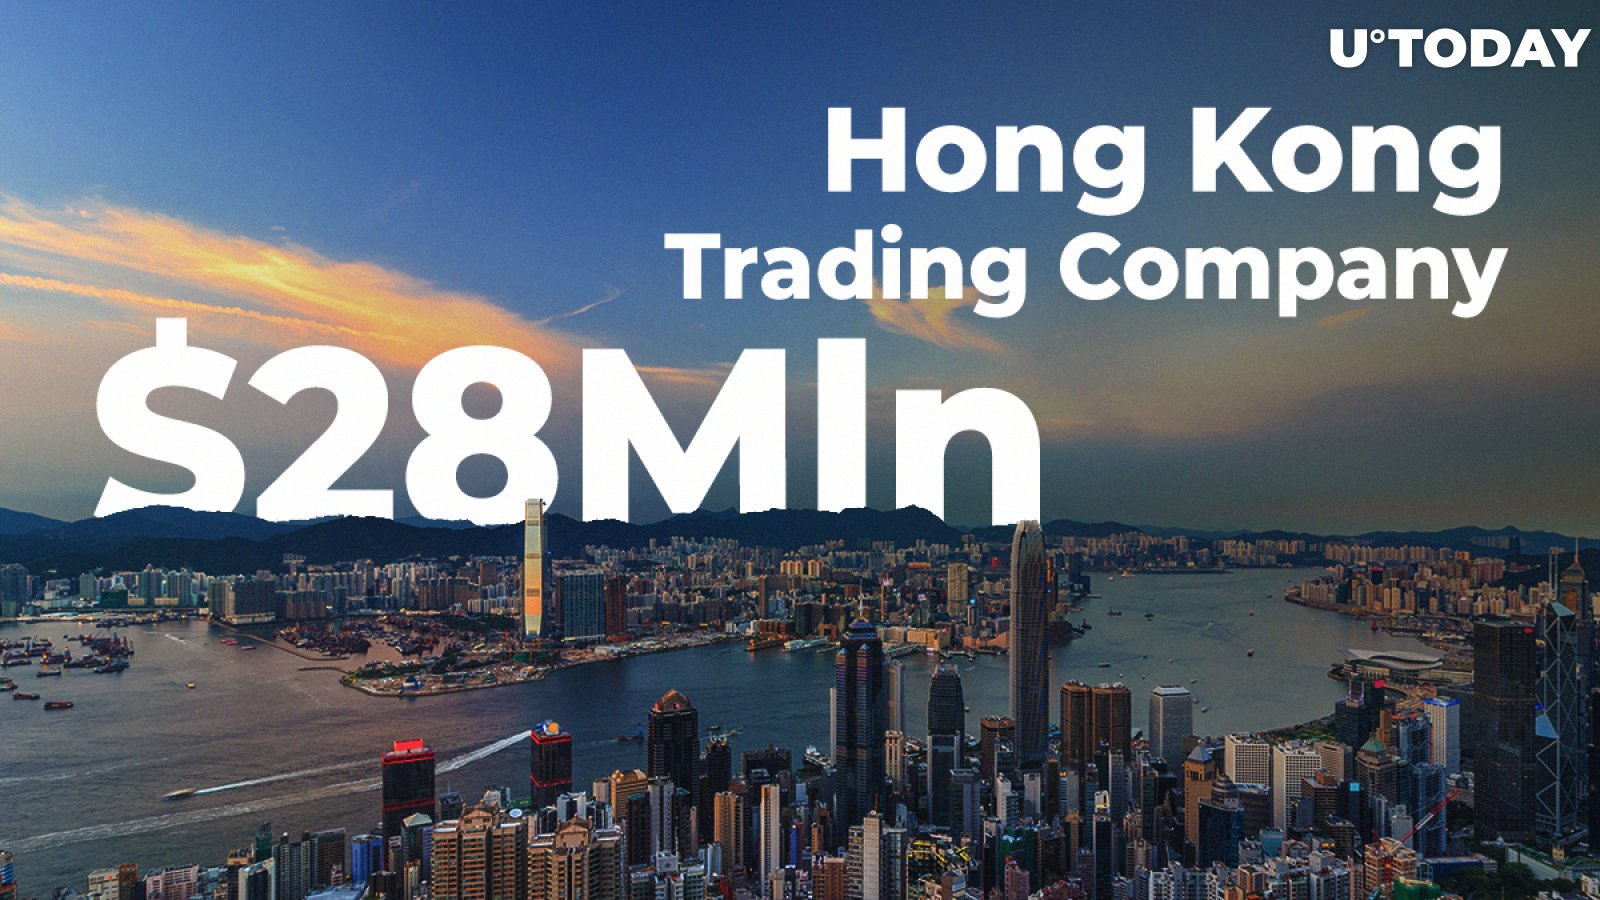 Crypto Behemoths Invest $28 Mln in Hong Kong Trading Company, Coinbase Joins Them